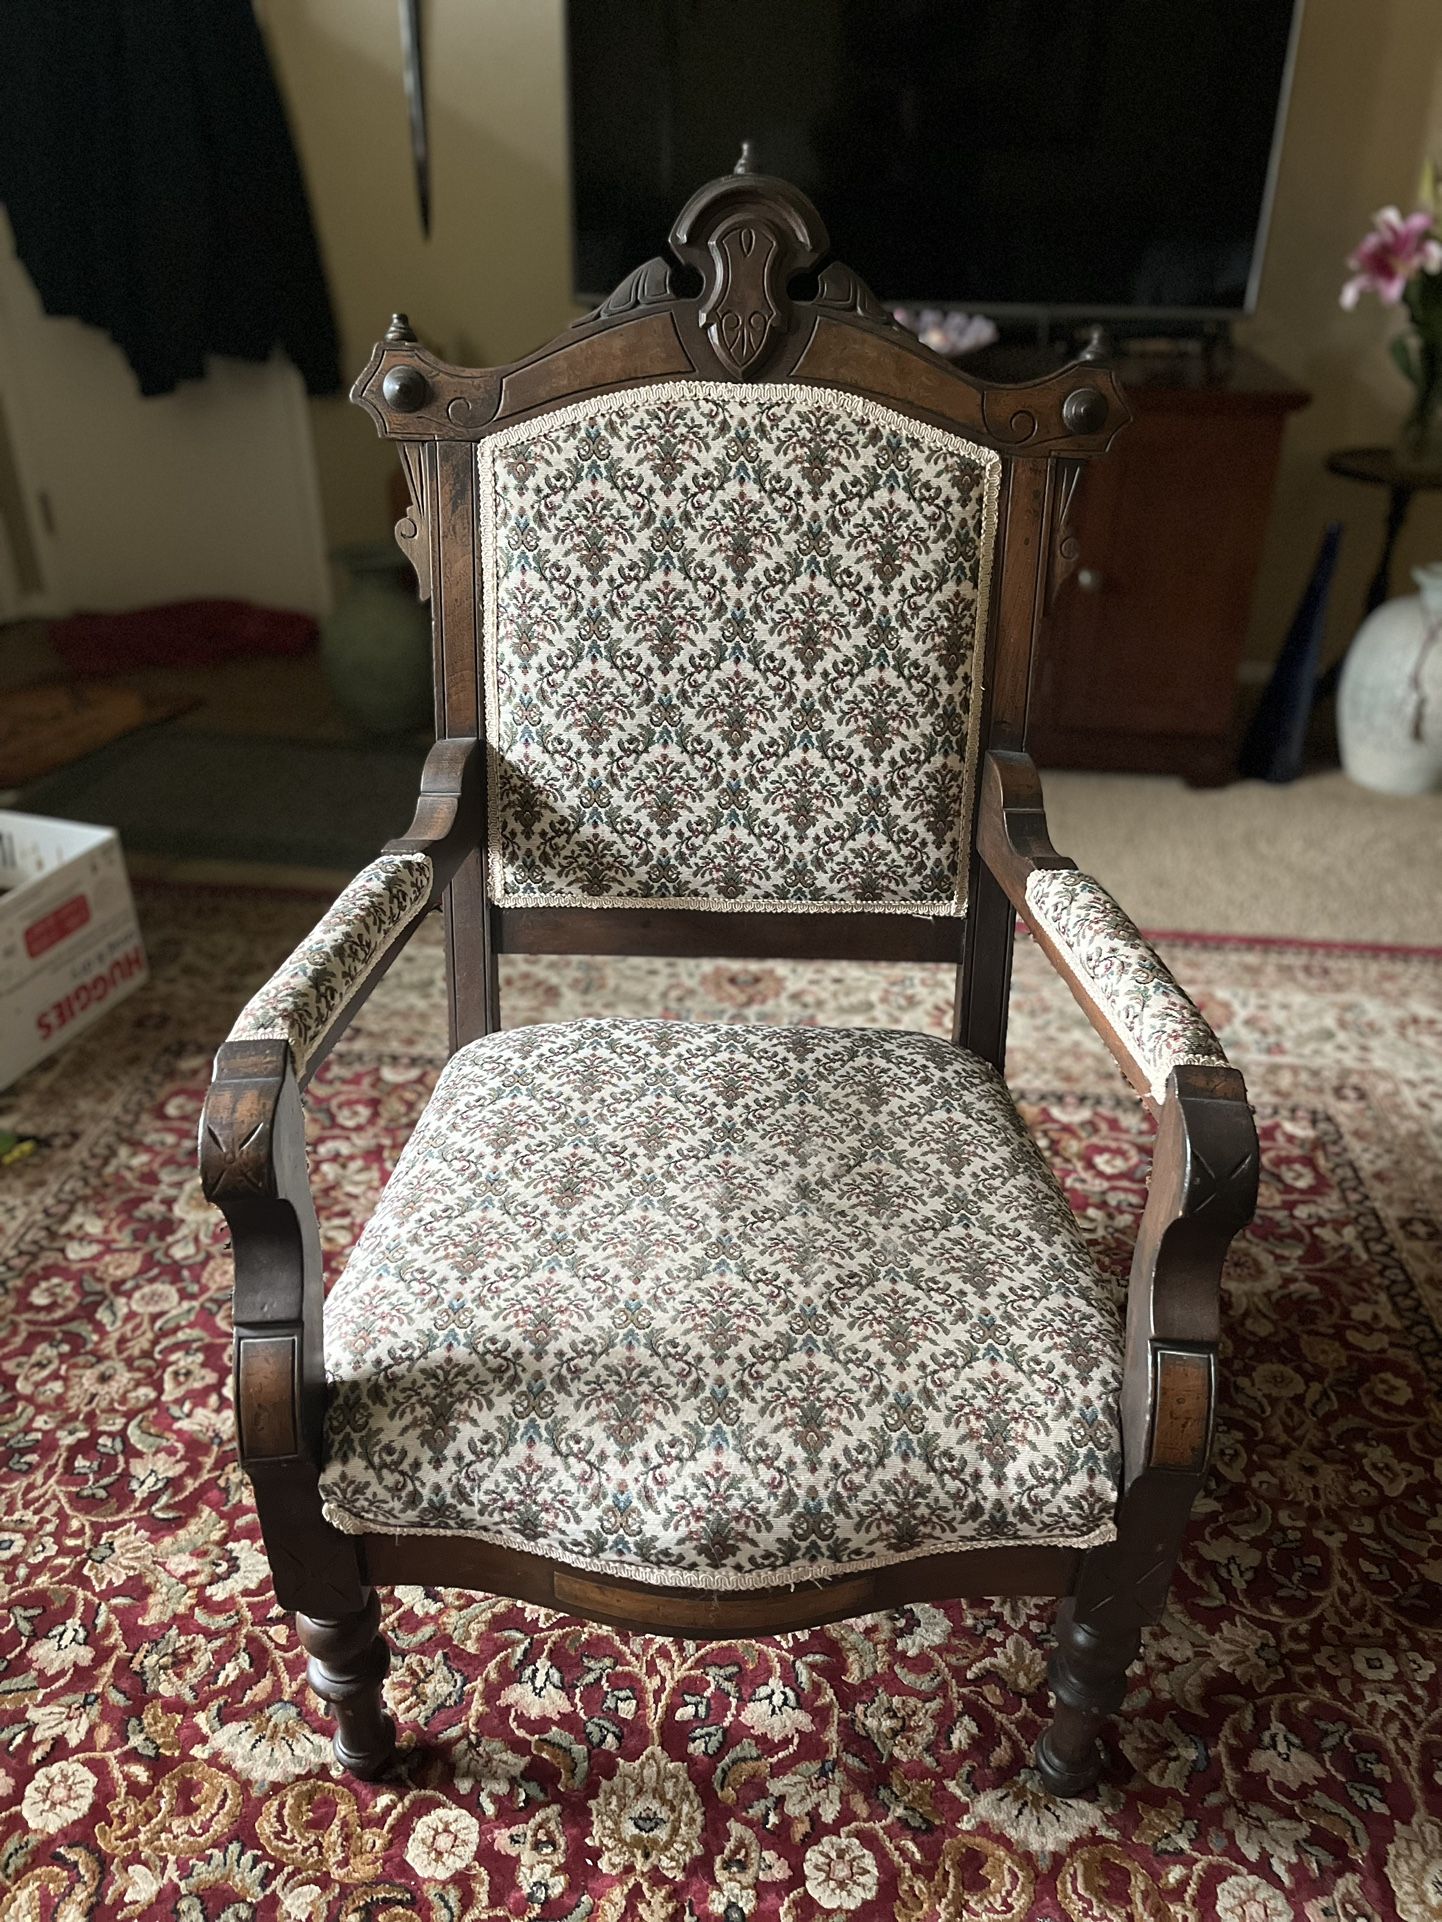 Antique Wooden Sitting Chair Has To Go Now